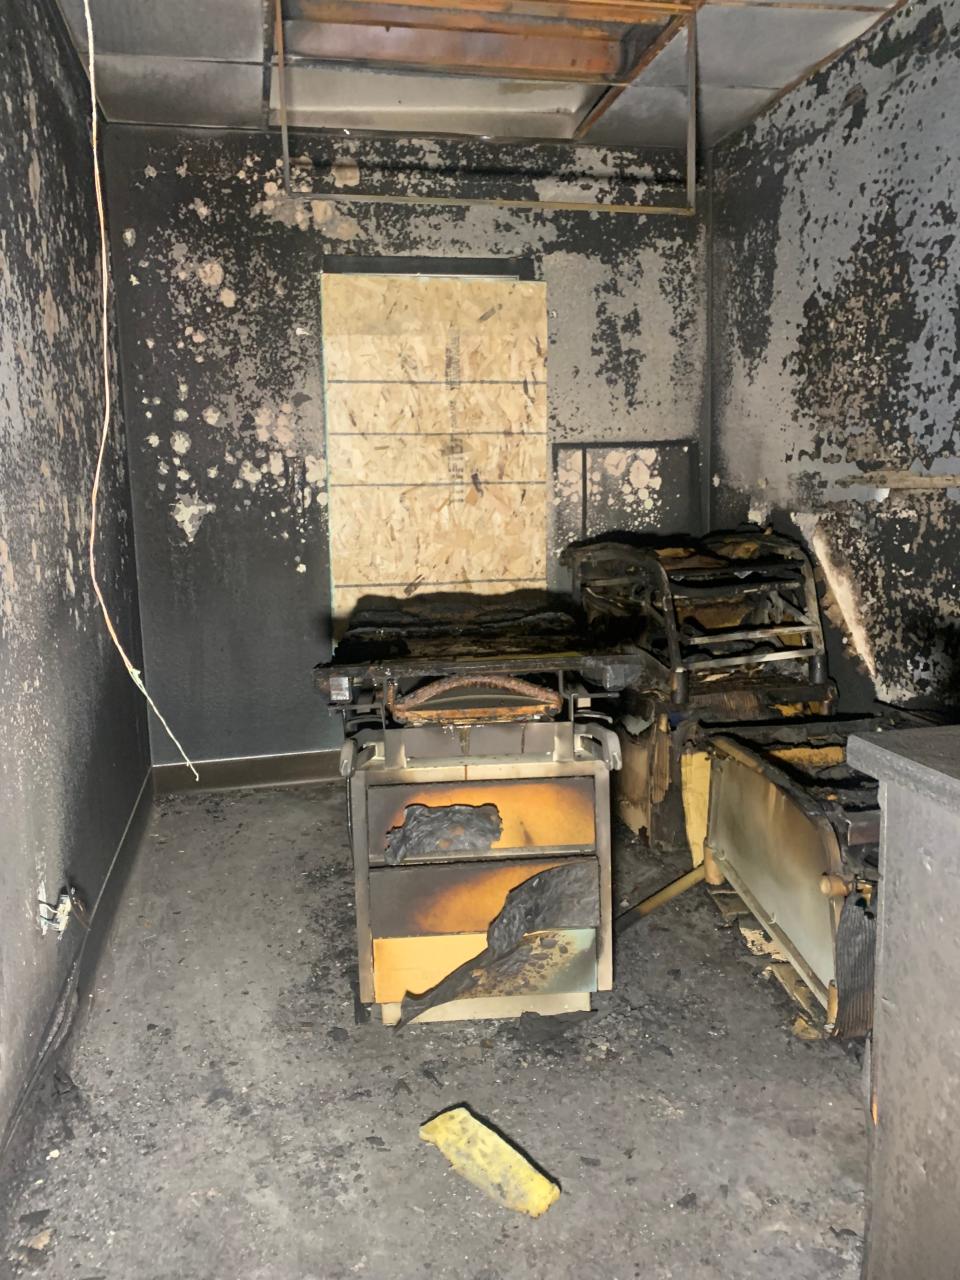 An arson last May at Wellspring Health Access in Casper, Wyoming has delayed the reproductive health clinic's opening for at least a year.